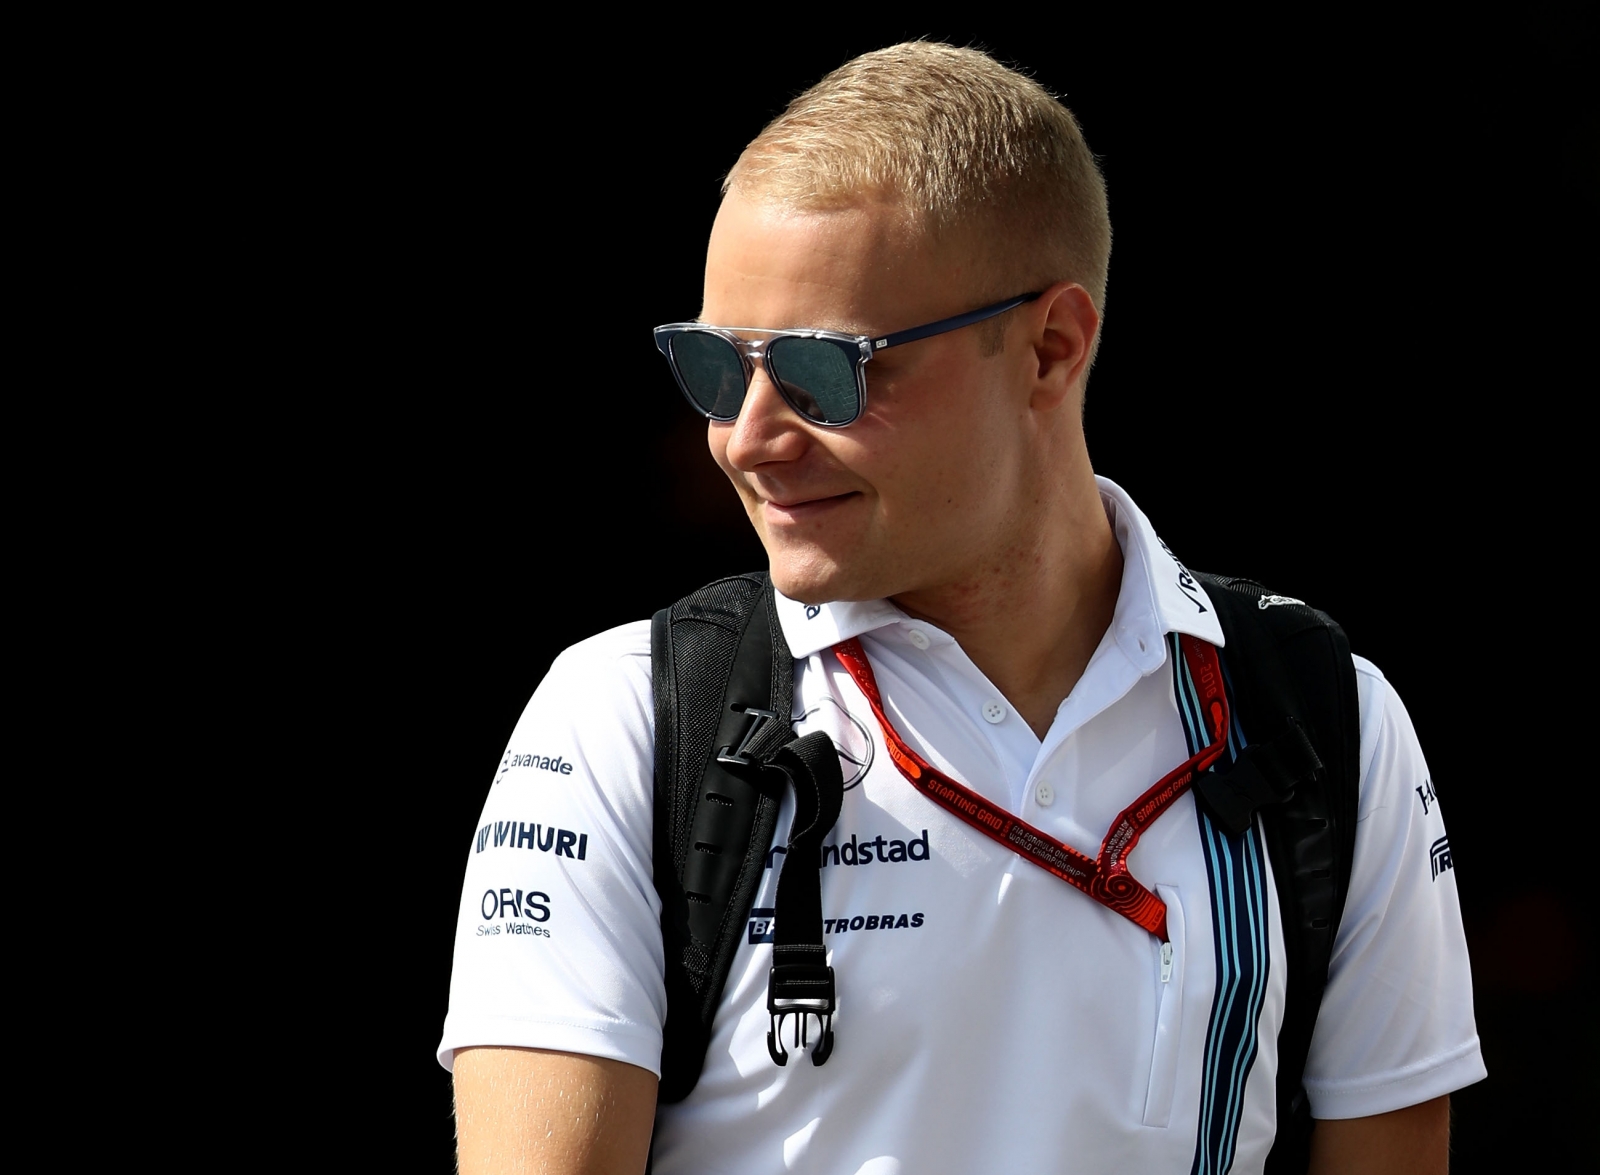 Claire Williams on Mercedes move for Valtteri Bottas: I knew Toto Wolff would come for him